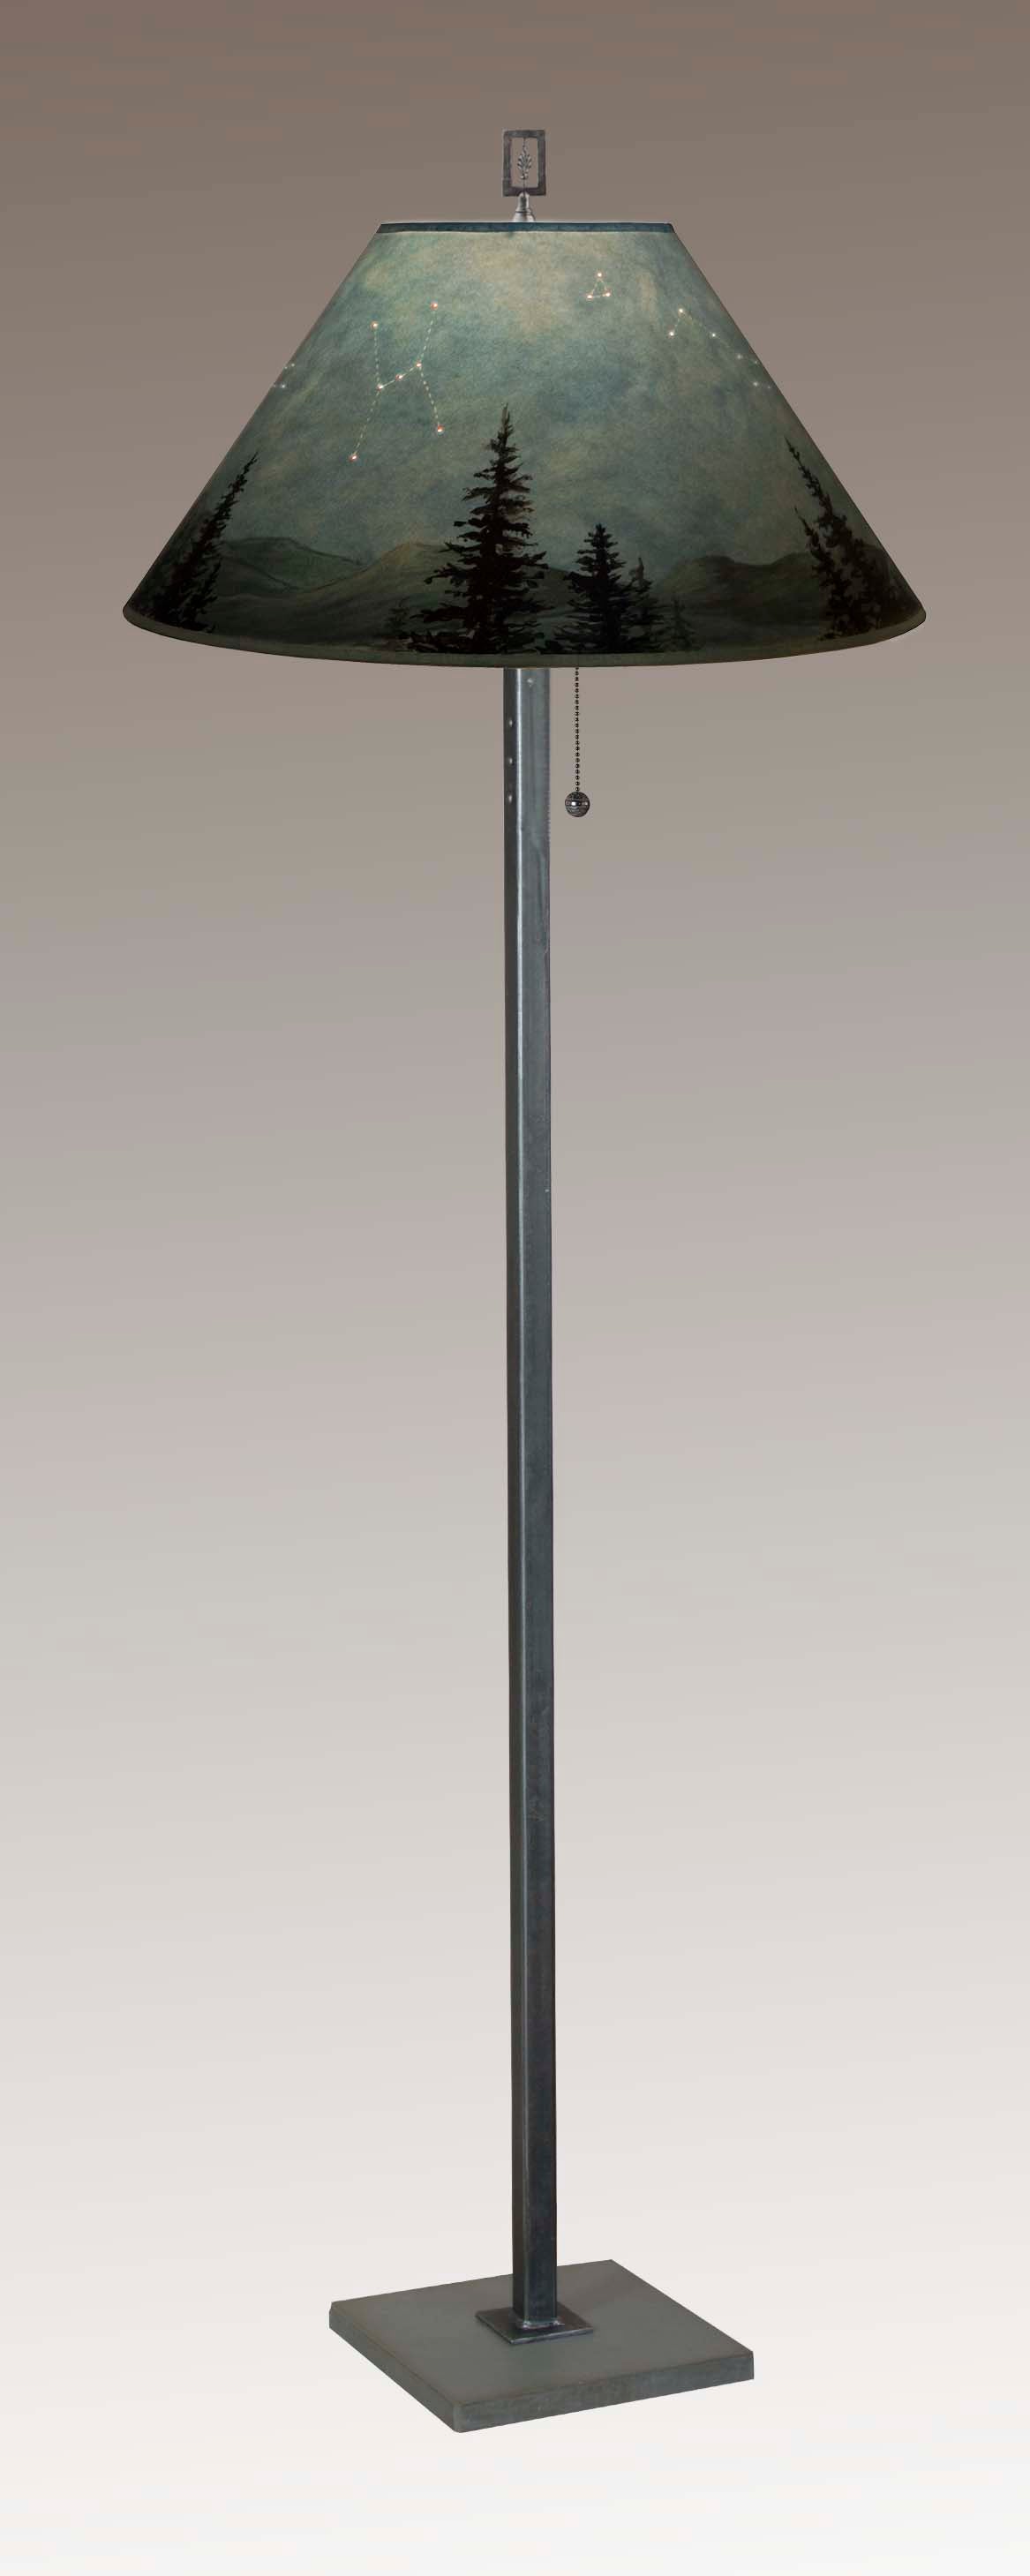 Steel Floor Lamp with Large Conical Shade in Midnight Sky